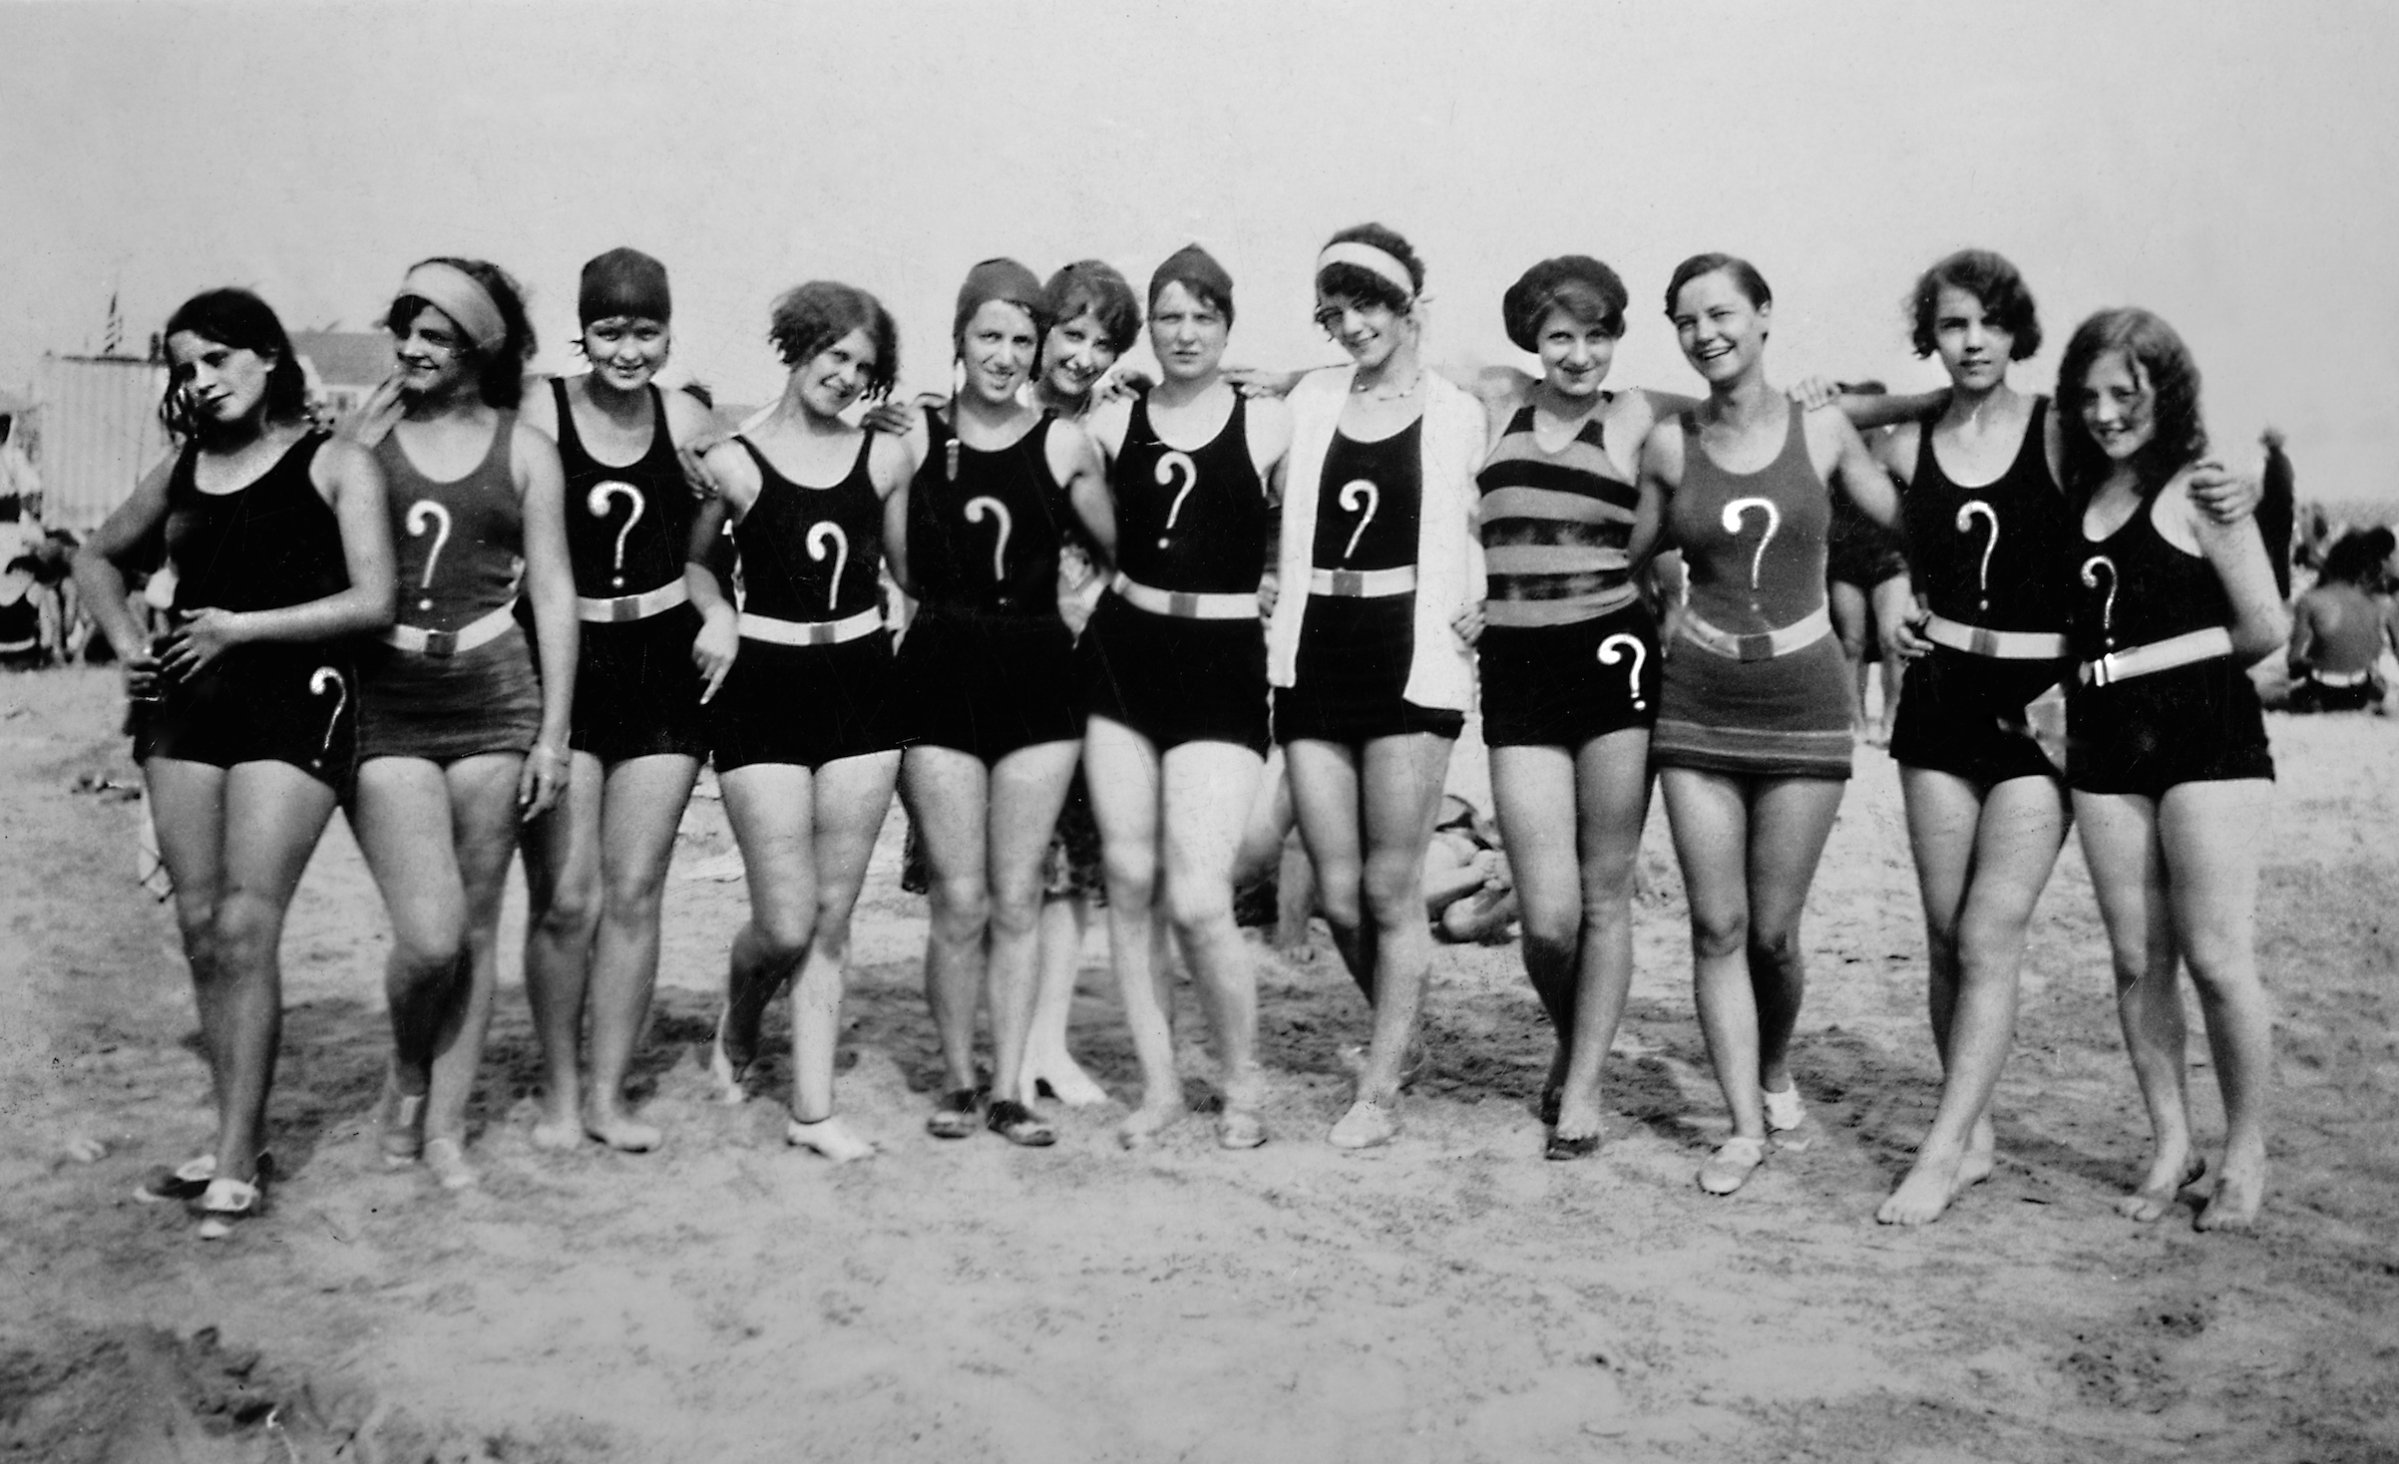 Questioning young women pose on the beach, ca. 1925